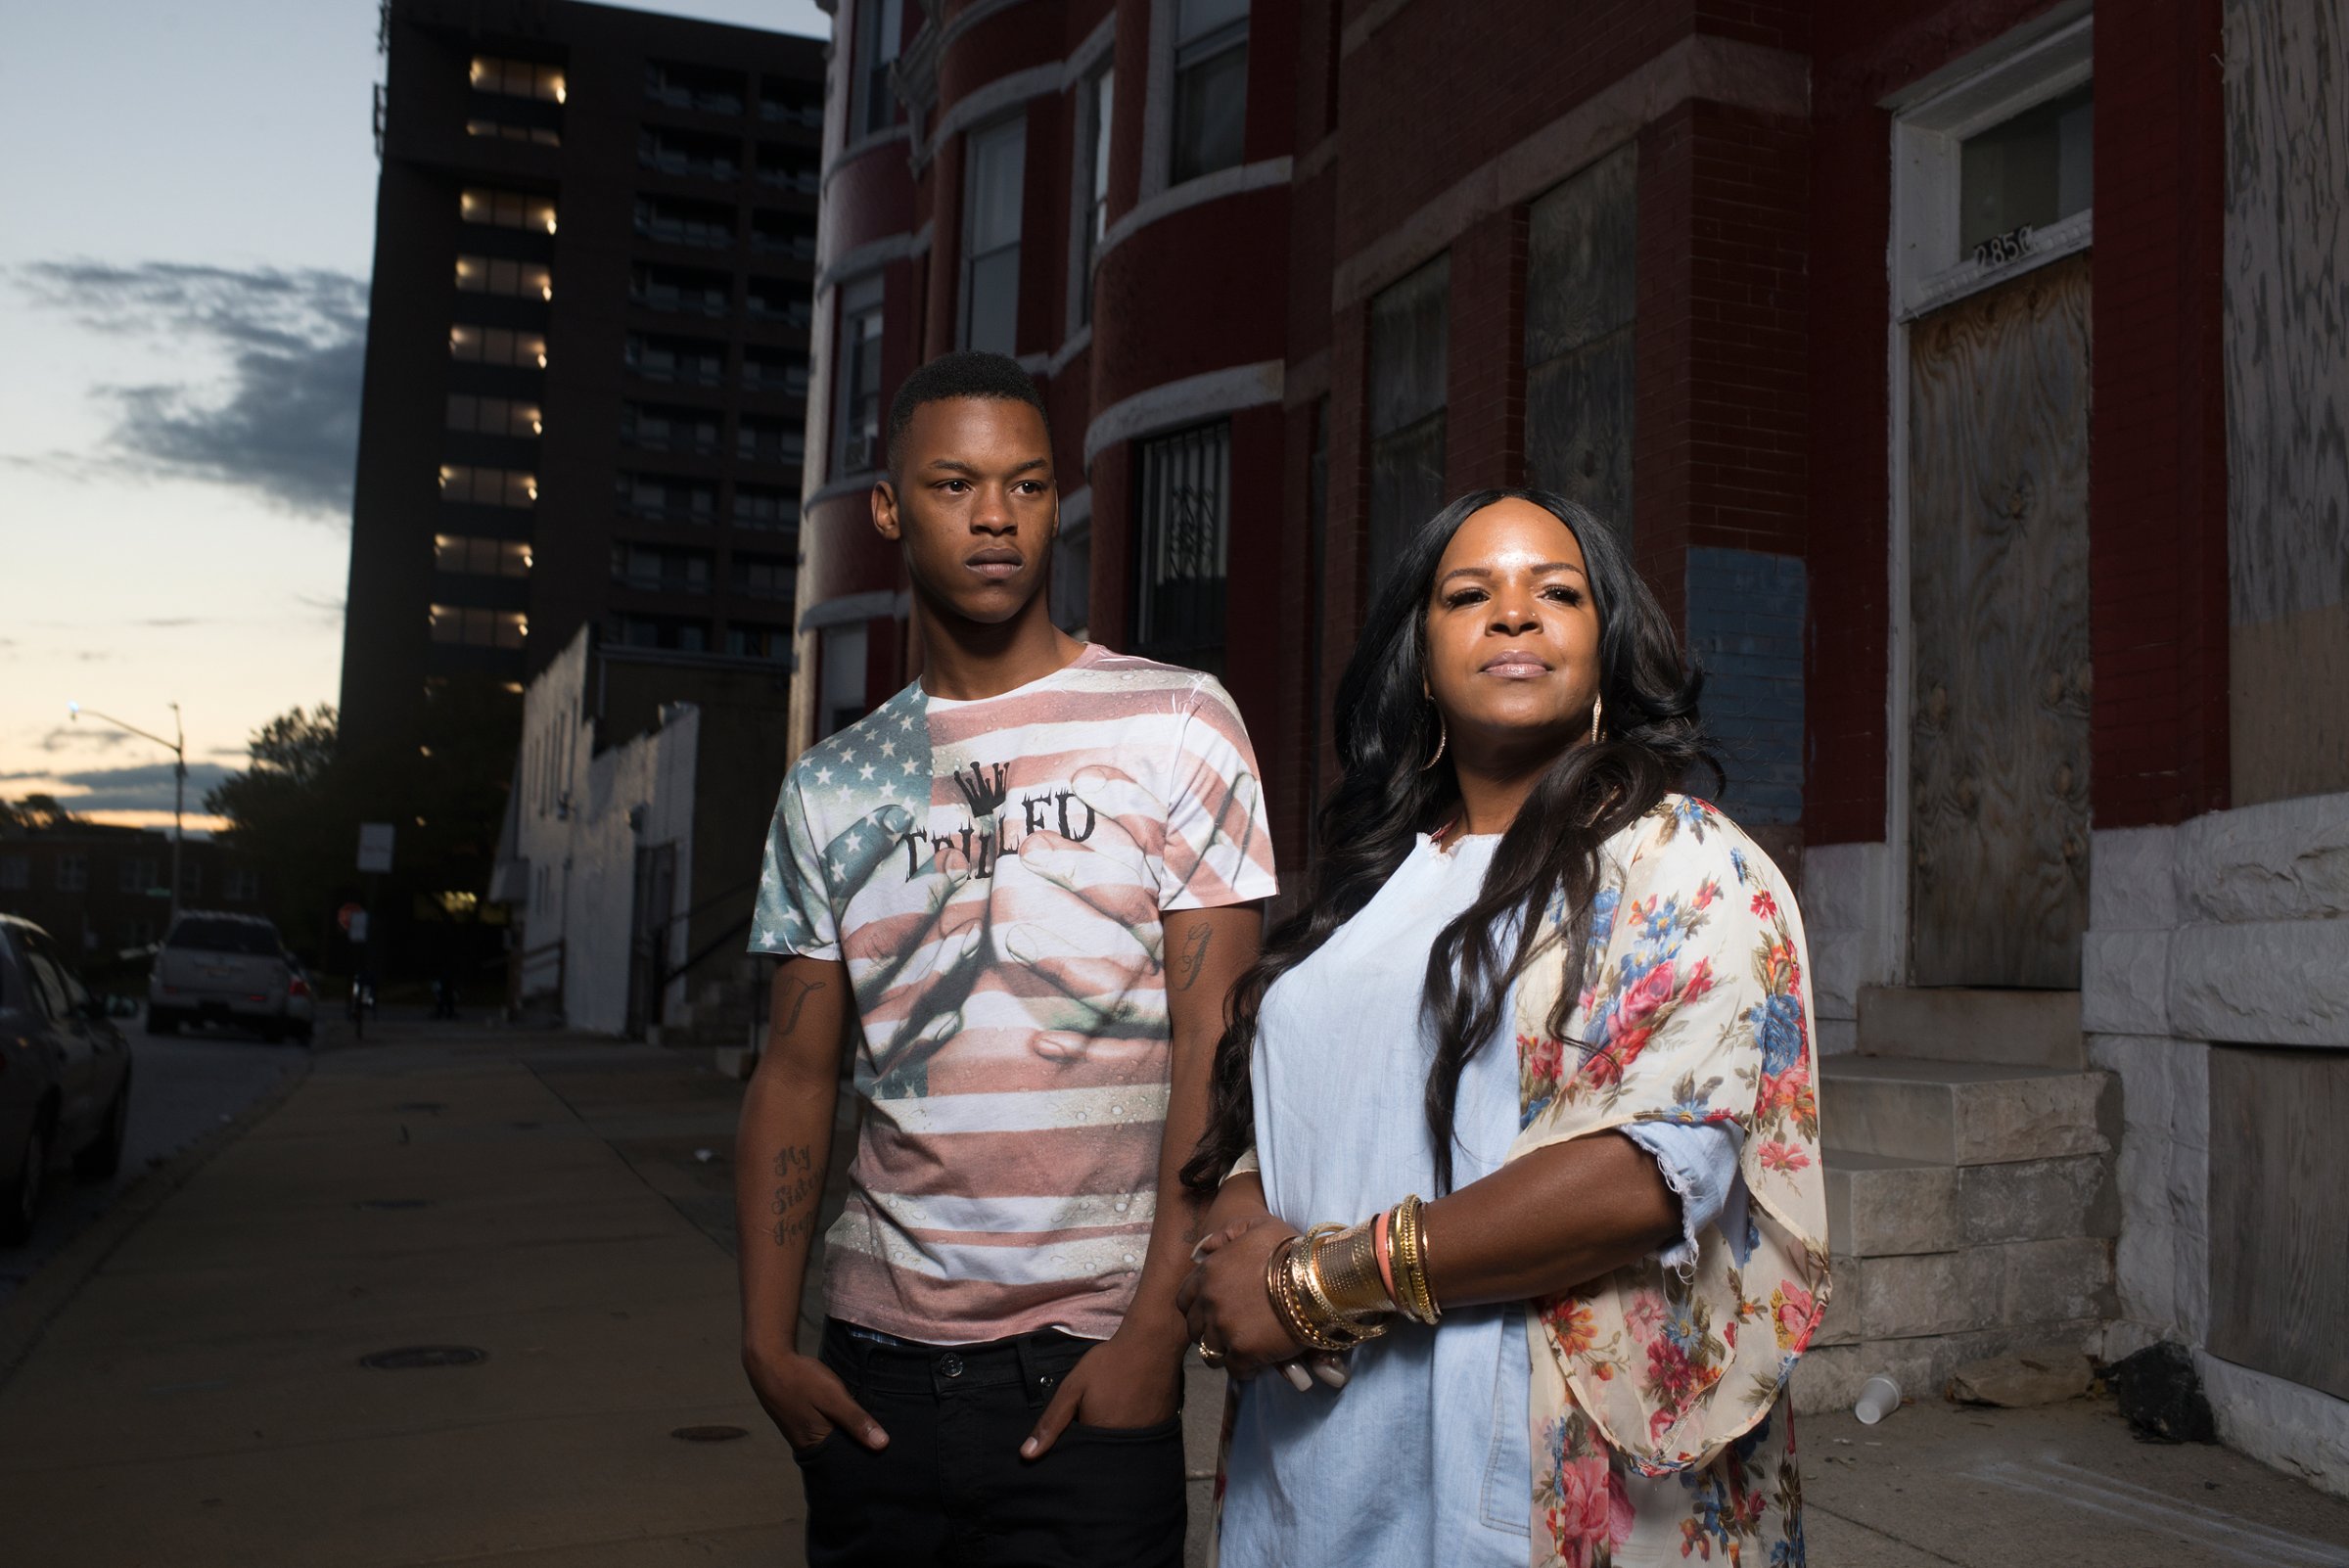 Michael Singleton and his mother Toya Graham outside their home in Baltimore on Oct. 14, 2015.